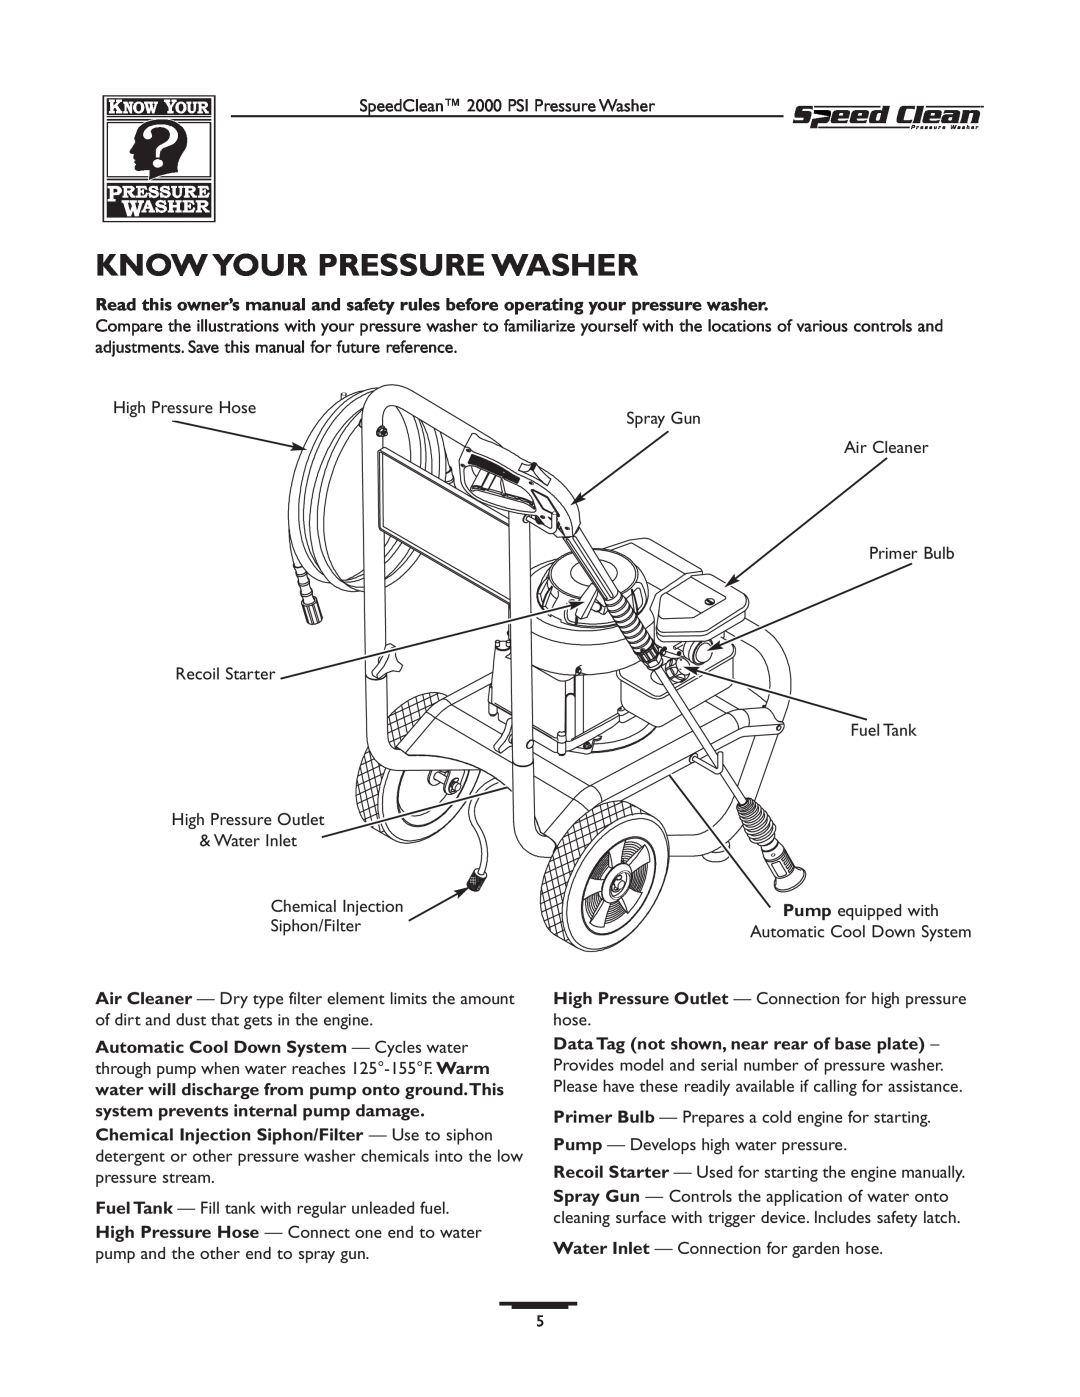 Briggs & Stratton 020211-0 owner manual Know Your Pressure Washer, Data Tag not shown, near rear of base plate 